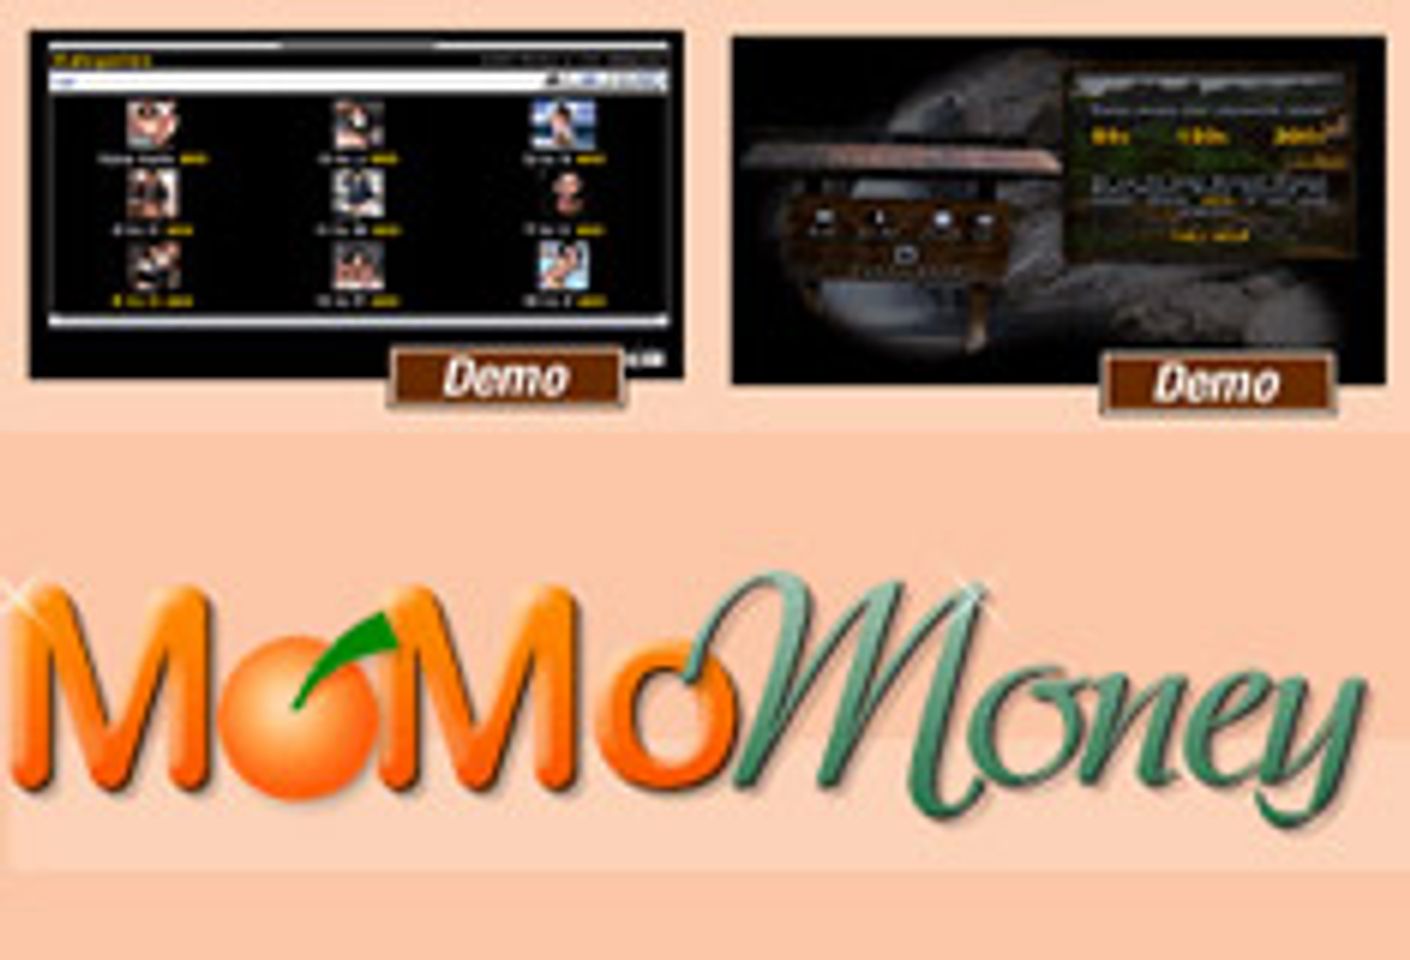 Two New Asian Plug-In Players: MoMo Systems